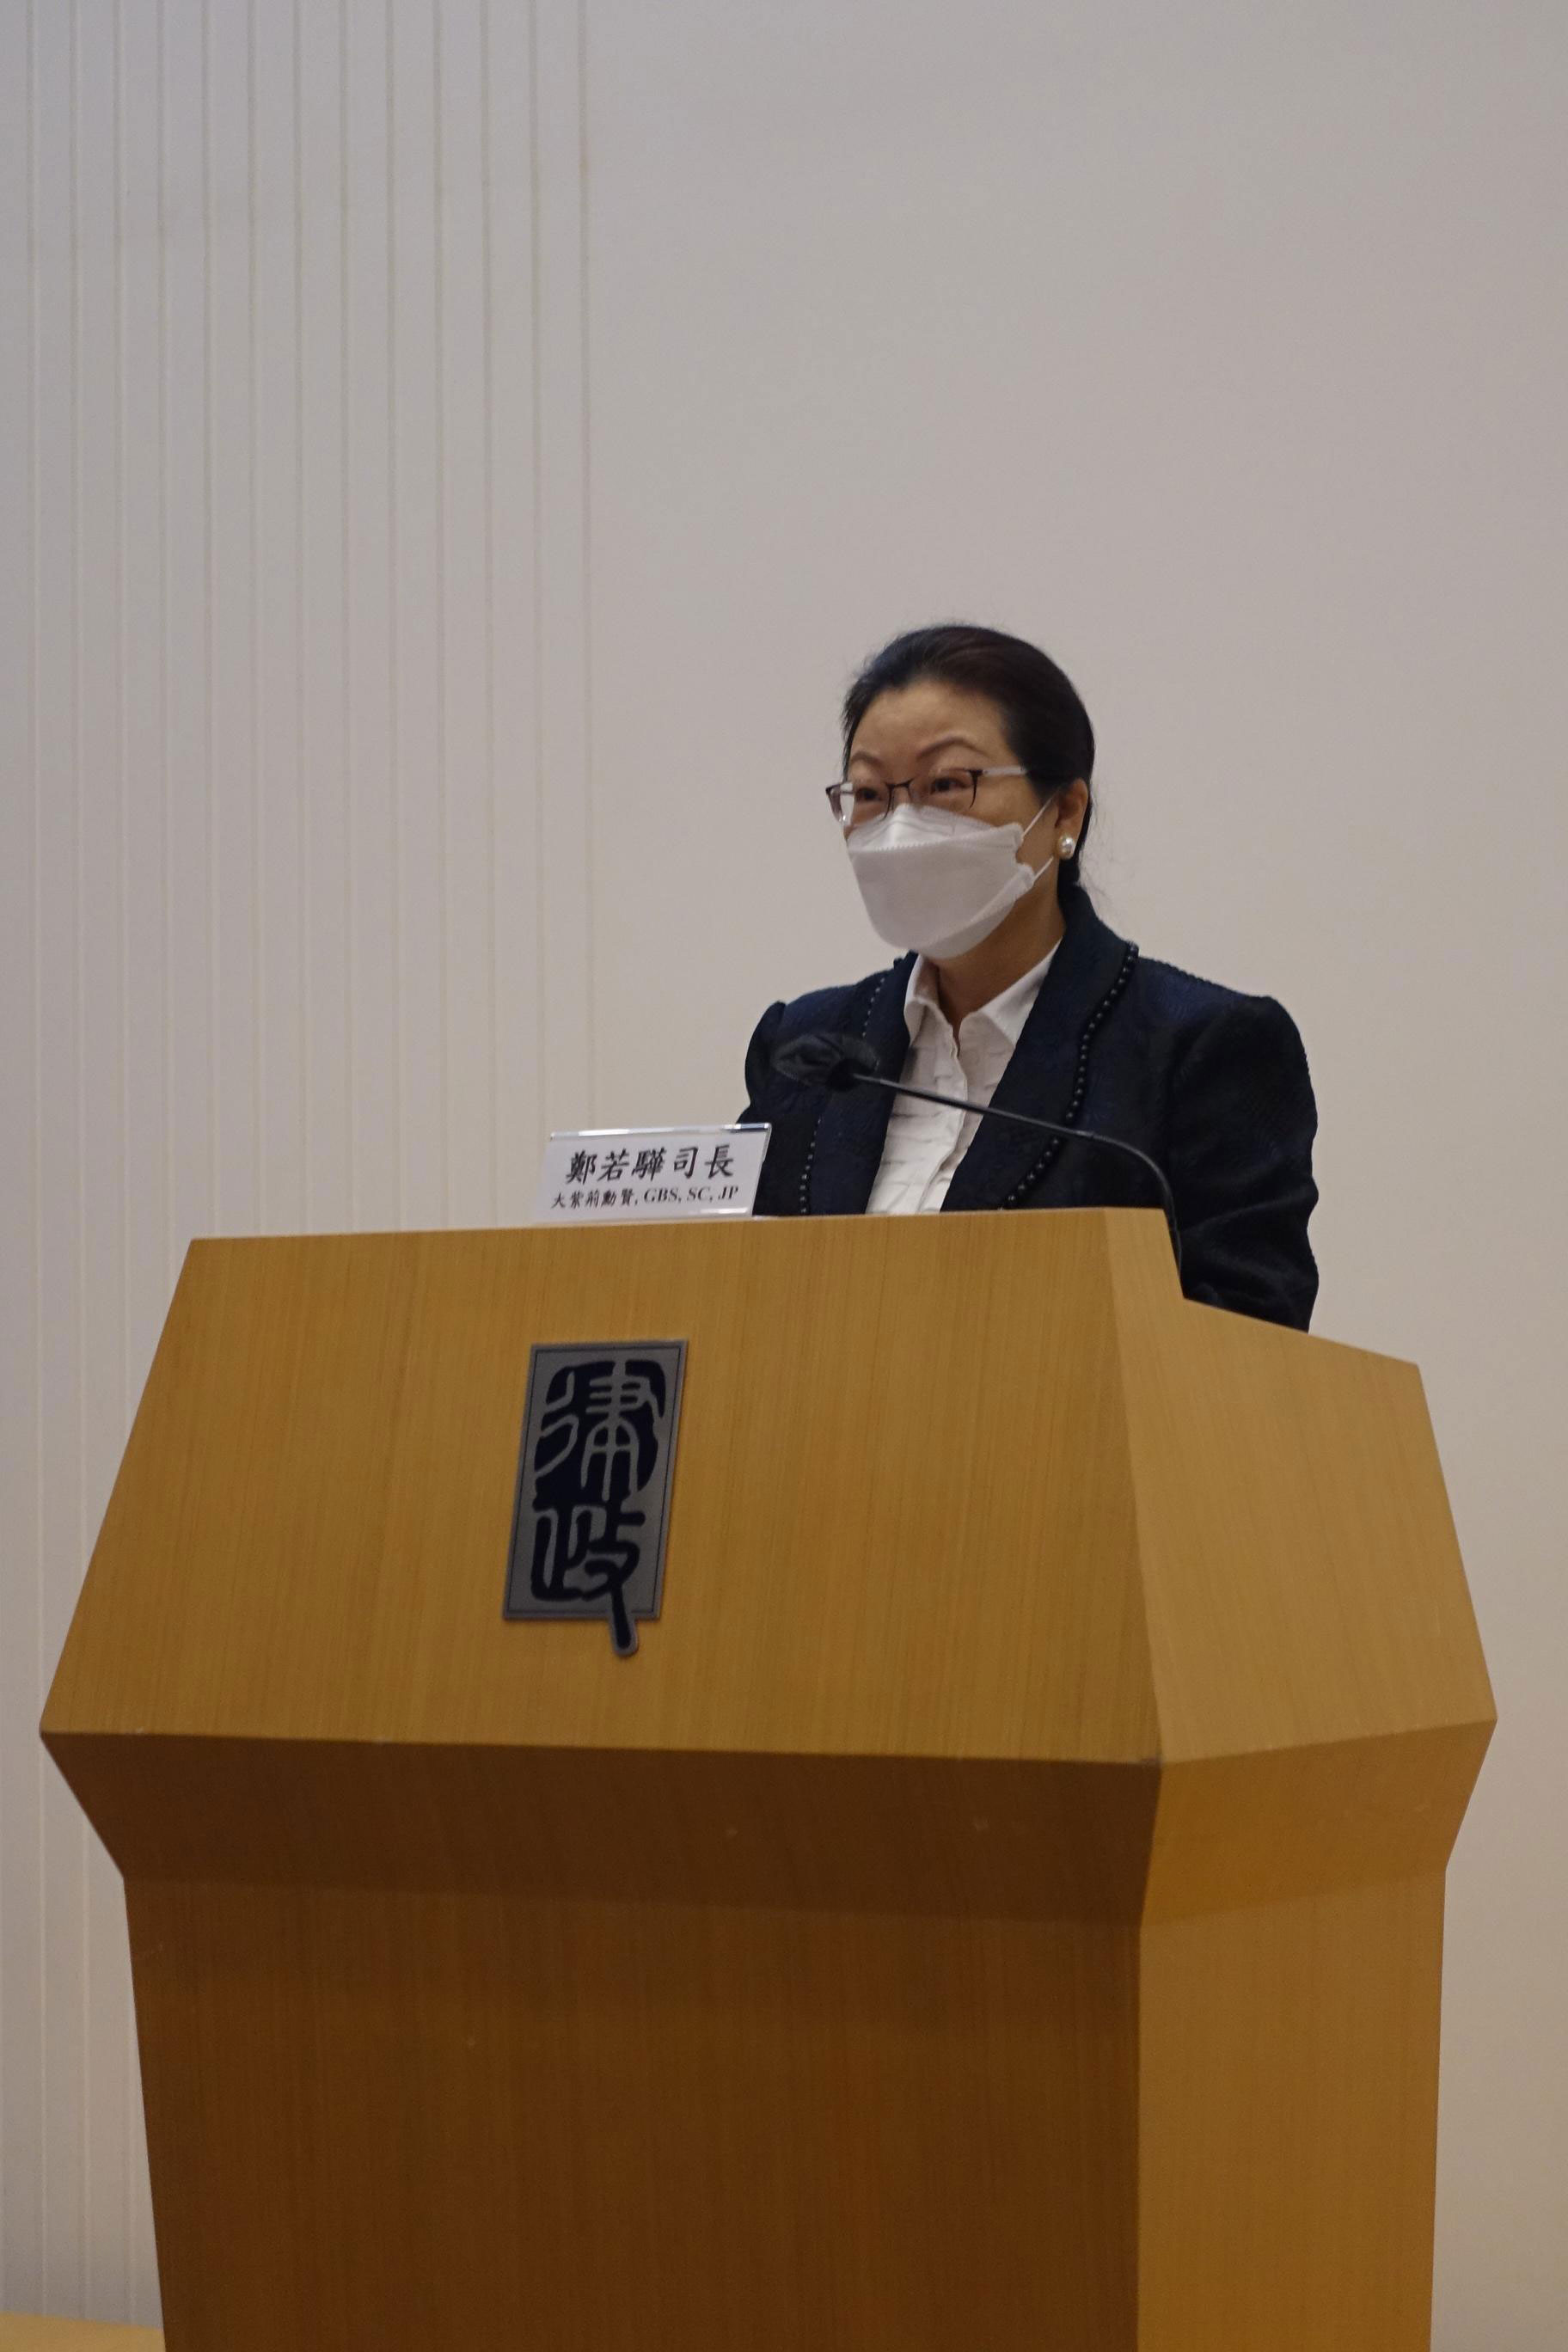 The Secretary for Justice, Ms Teresa Cheng, SC, delivers her opening remarks at the 2nd Guangdong-Hong Kong-Macao Greater Bay Area Judicial Case Seminar today (April 23).